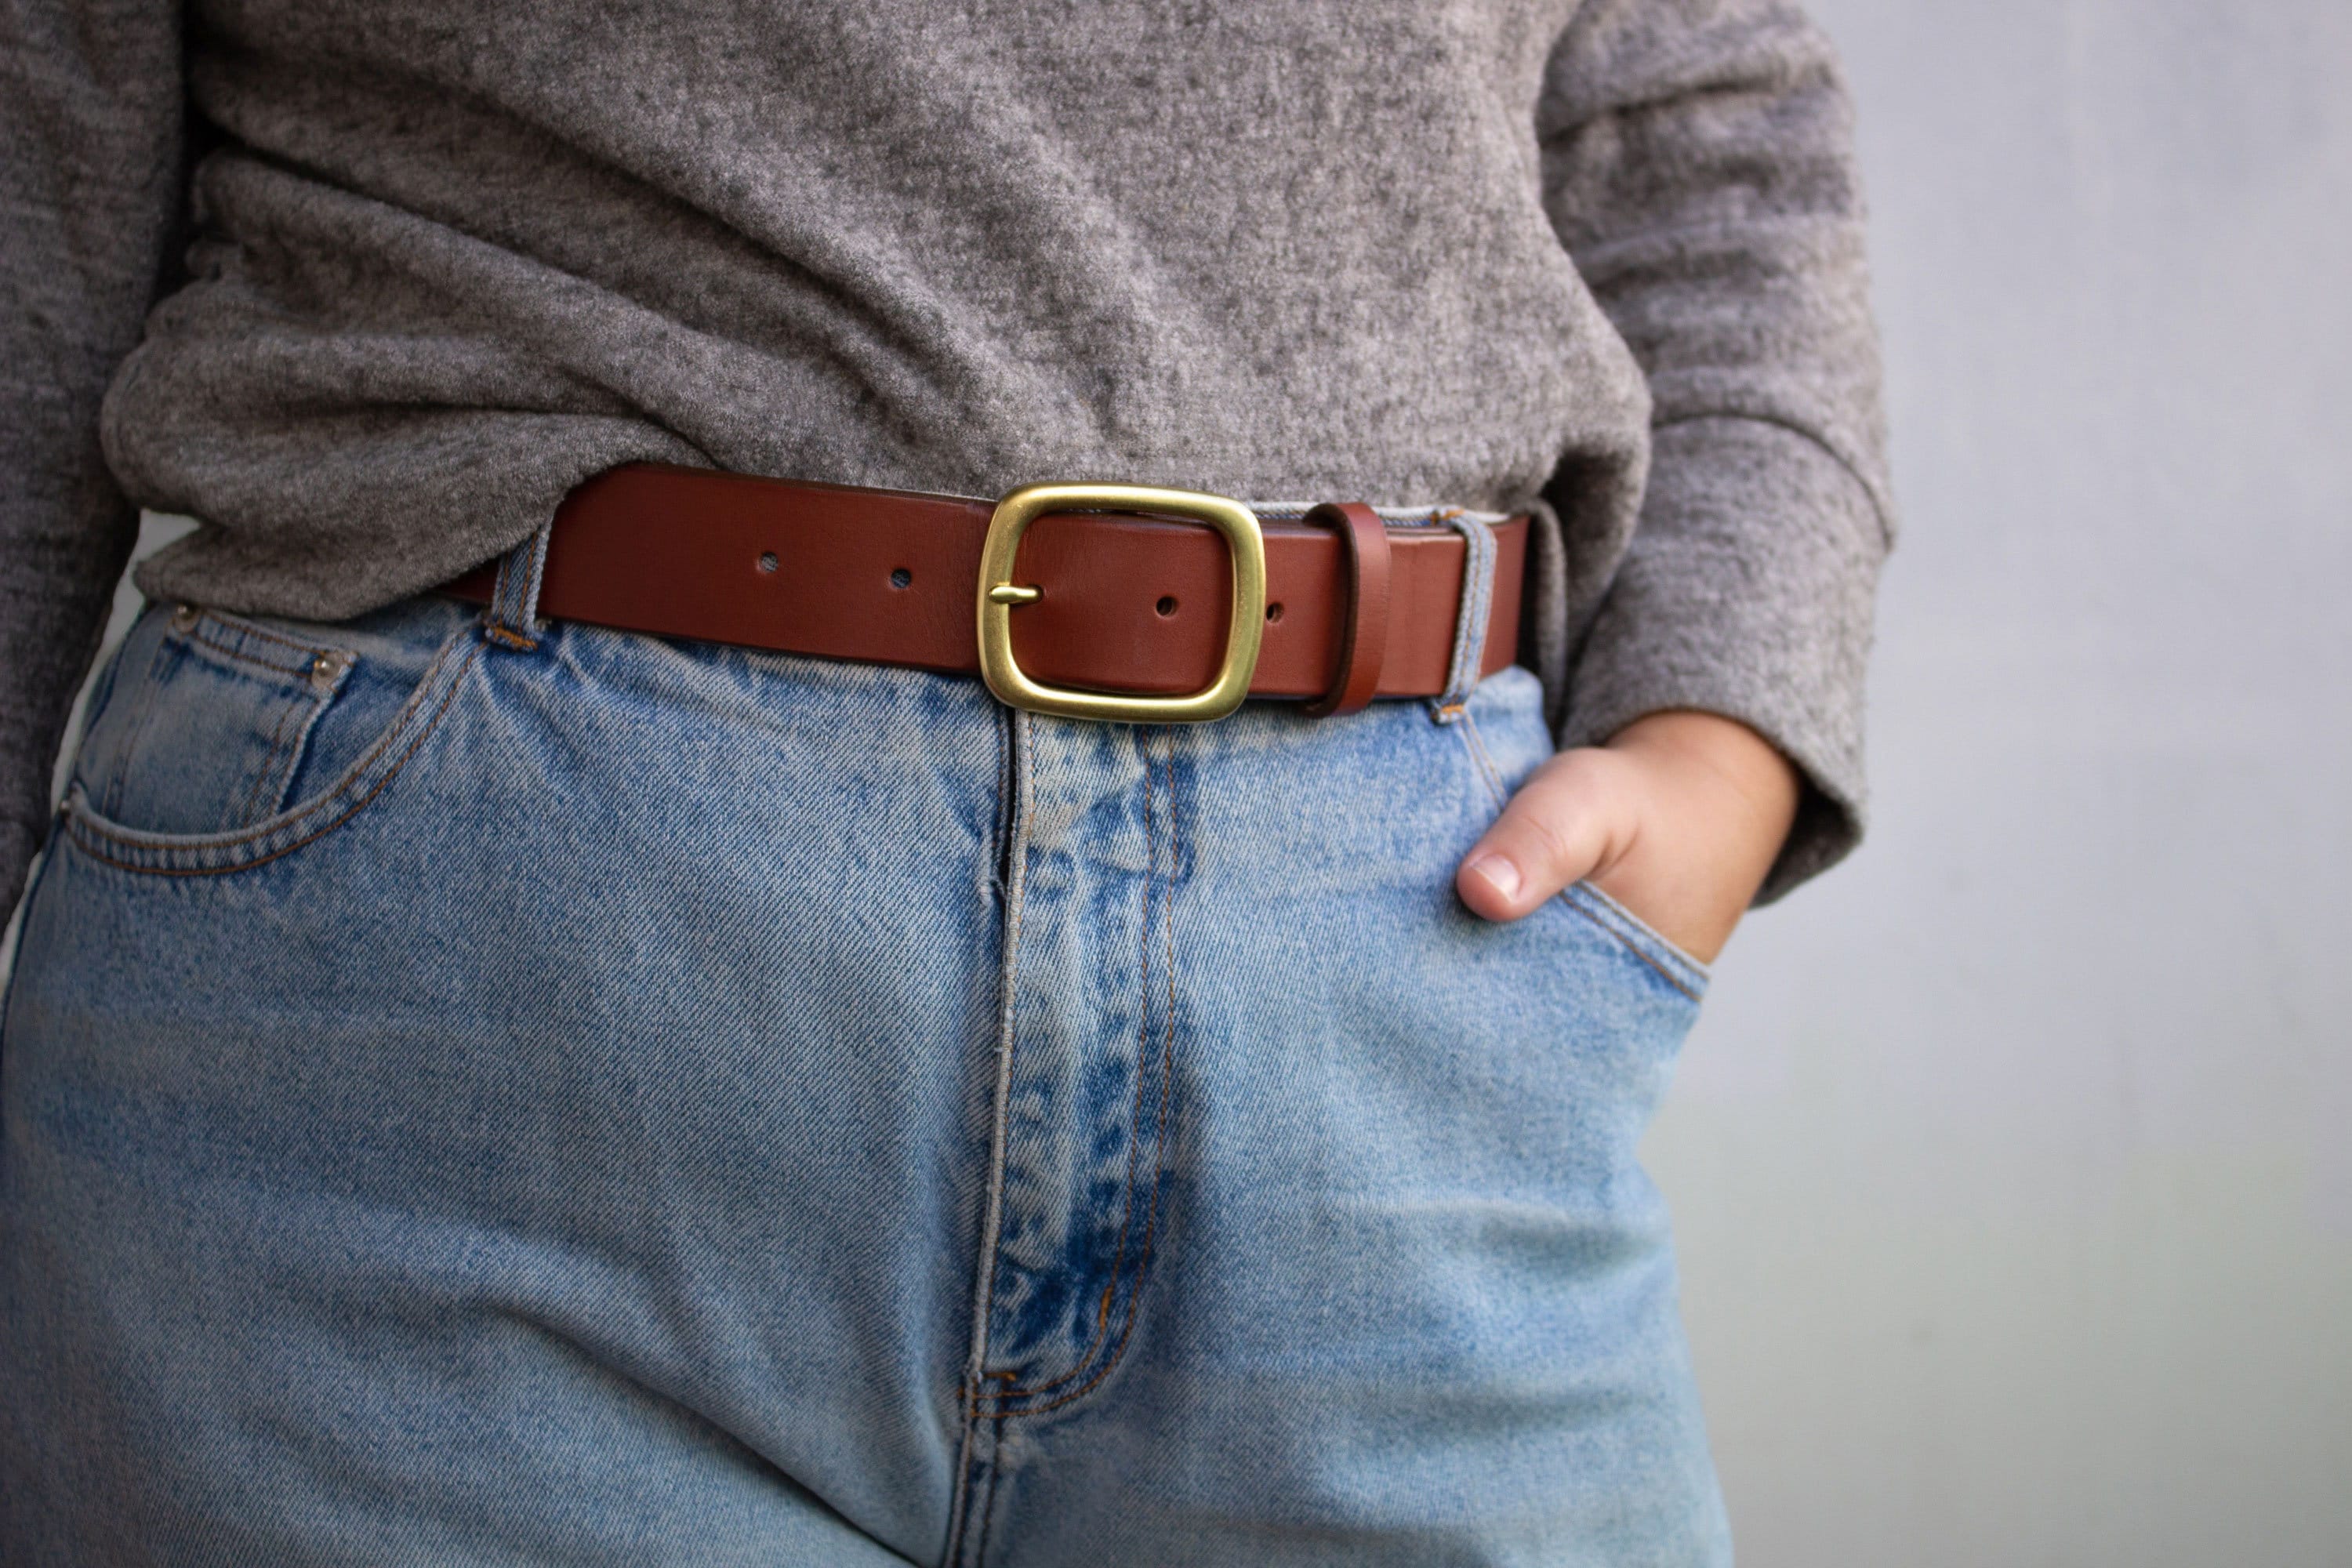 Vegetable tanned men's leather Louis belt with square buckle – Le